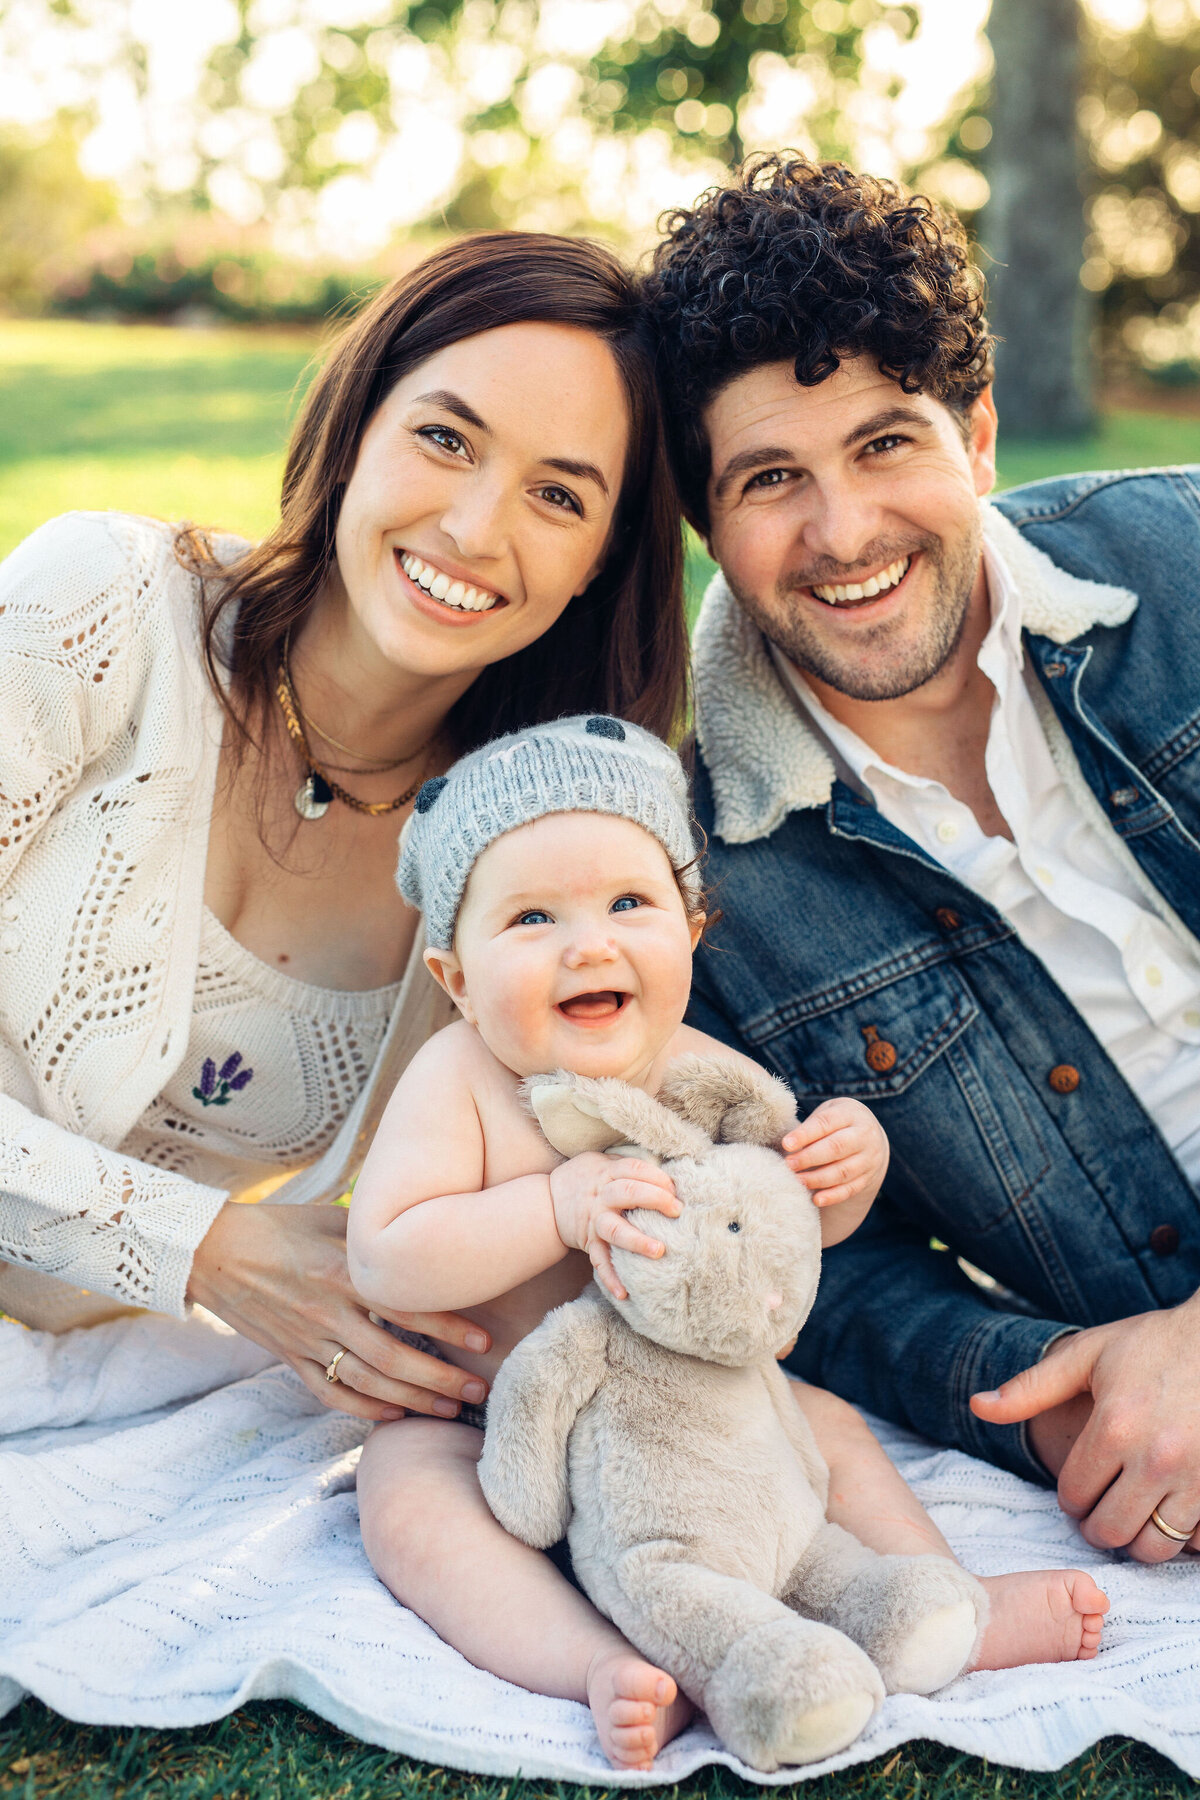 Family Portrait Photo Of Couple Smiling With Their Baby While Seated On The Ground In Los Angeles